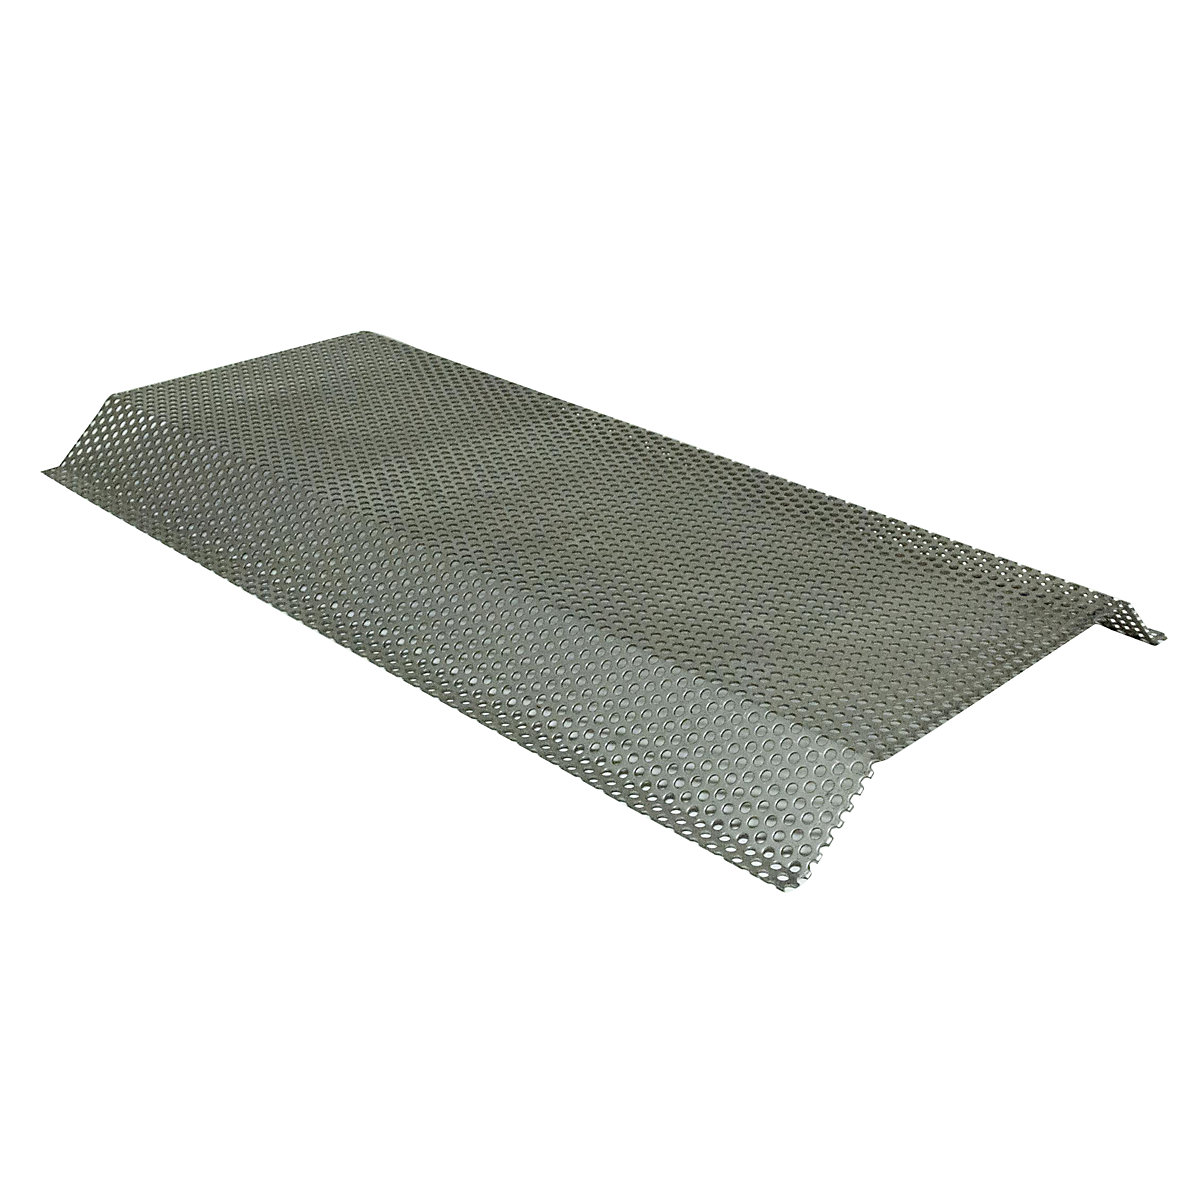 Perforated base